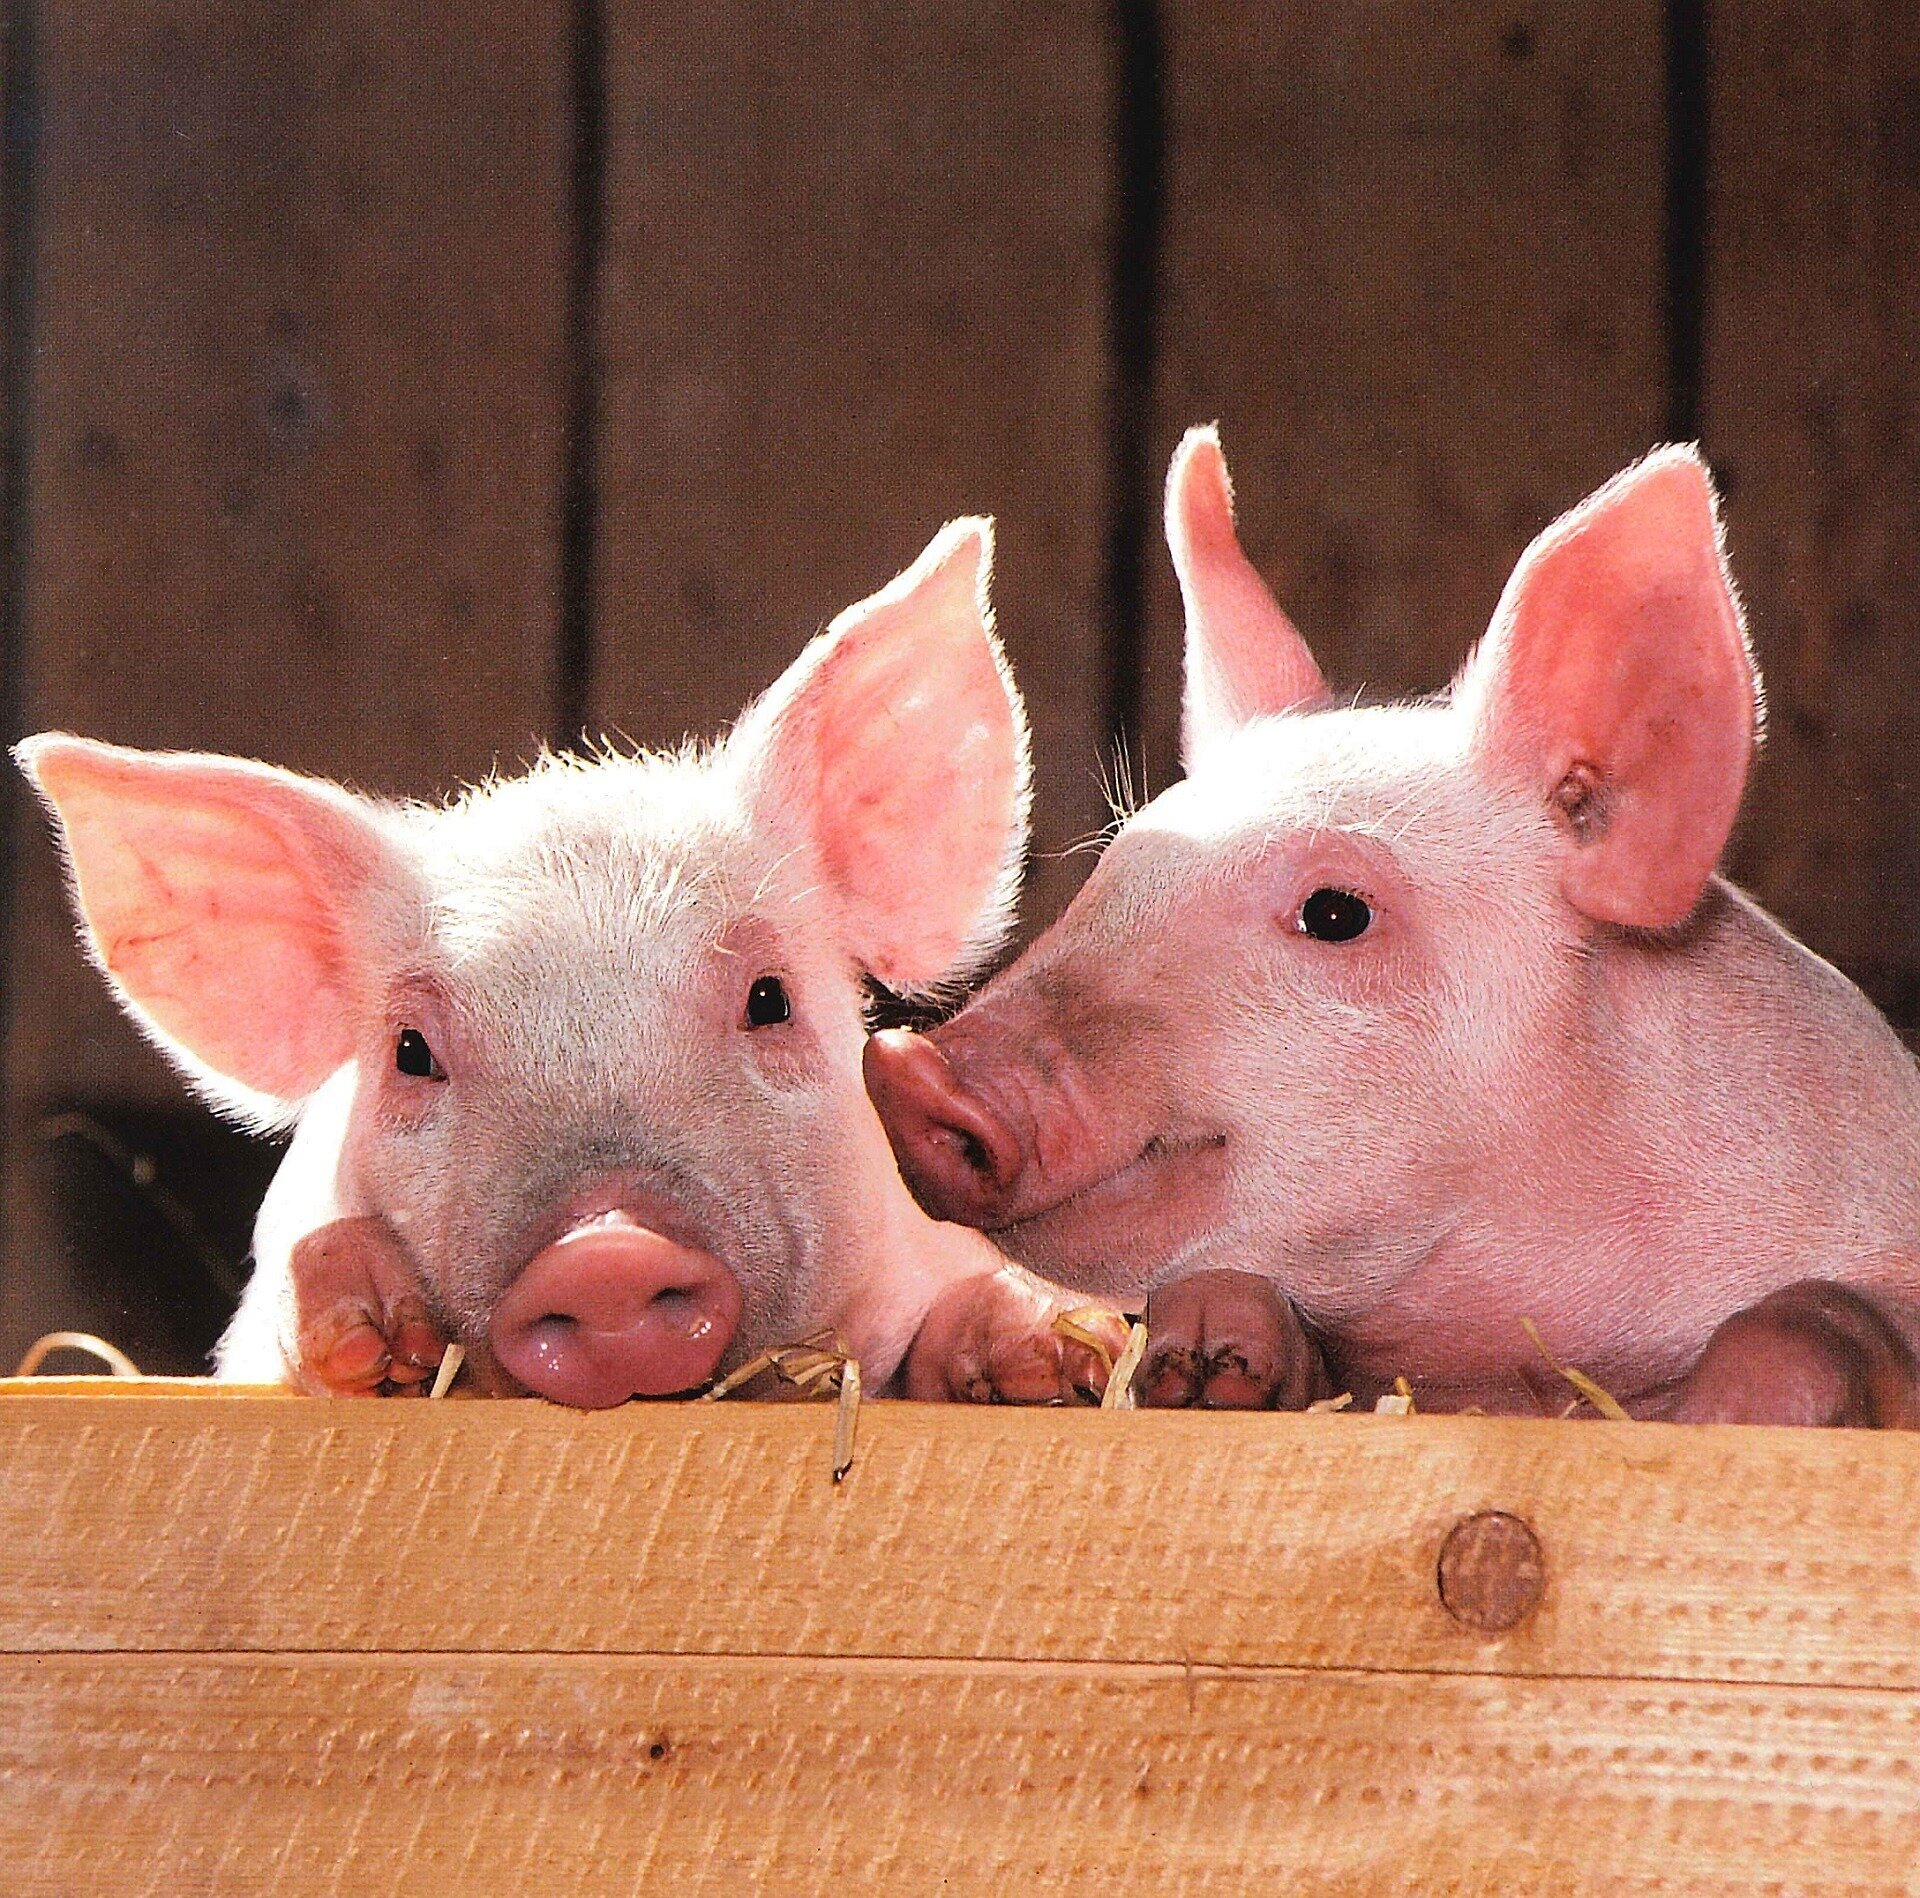 Study shows naming farm animals reduces preschoolers' desire to eat them